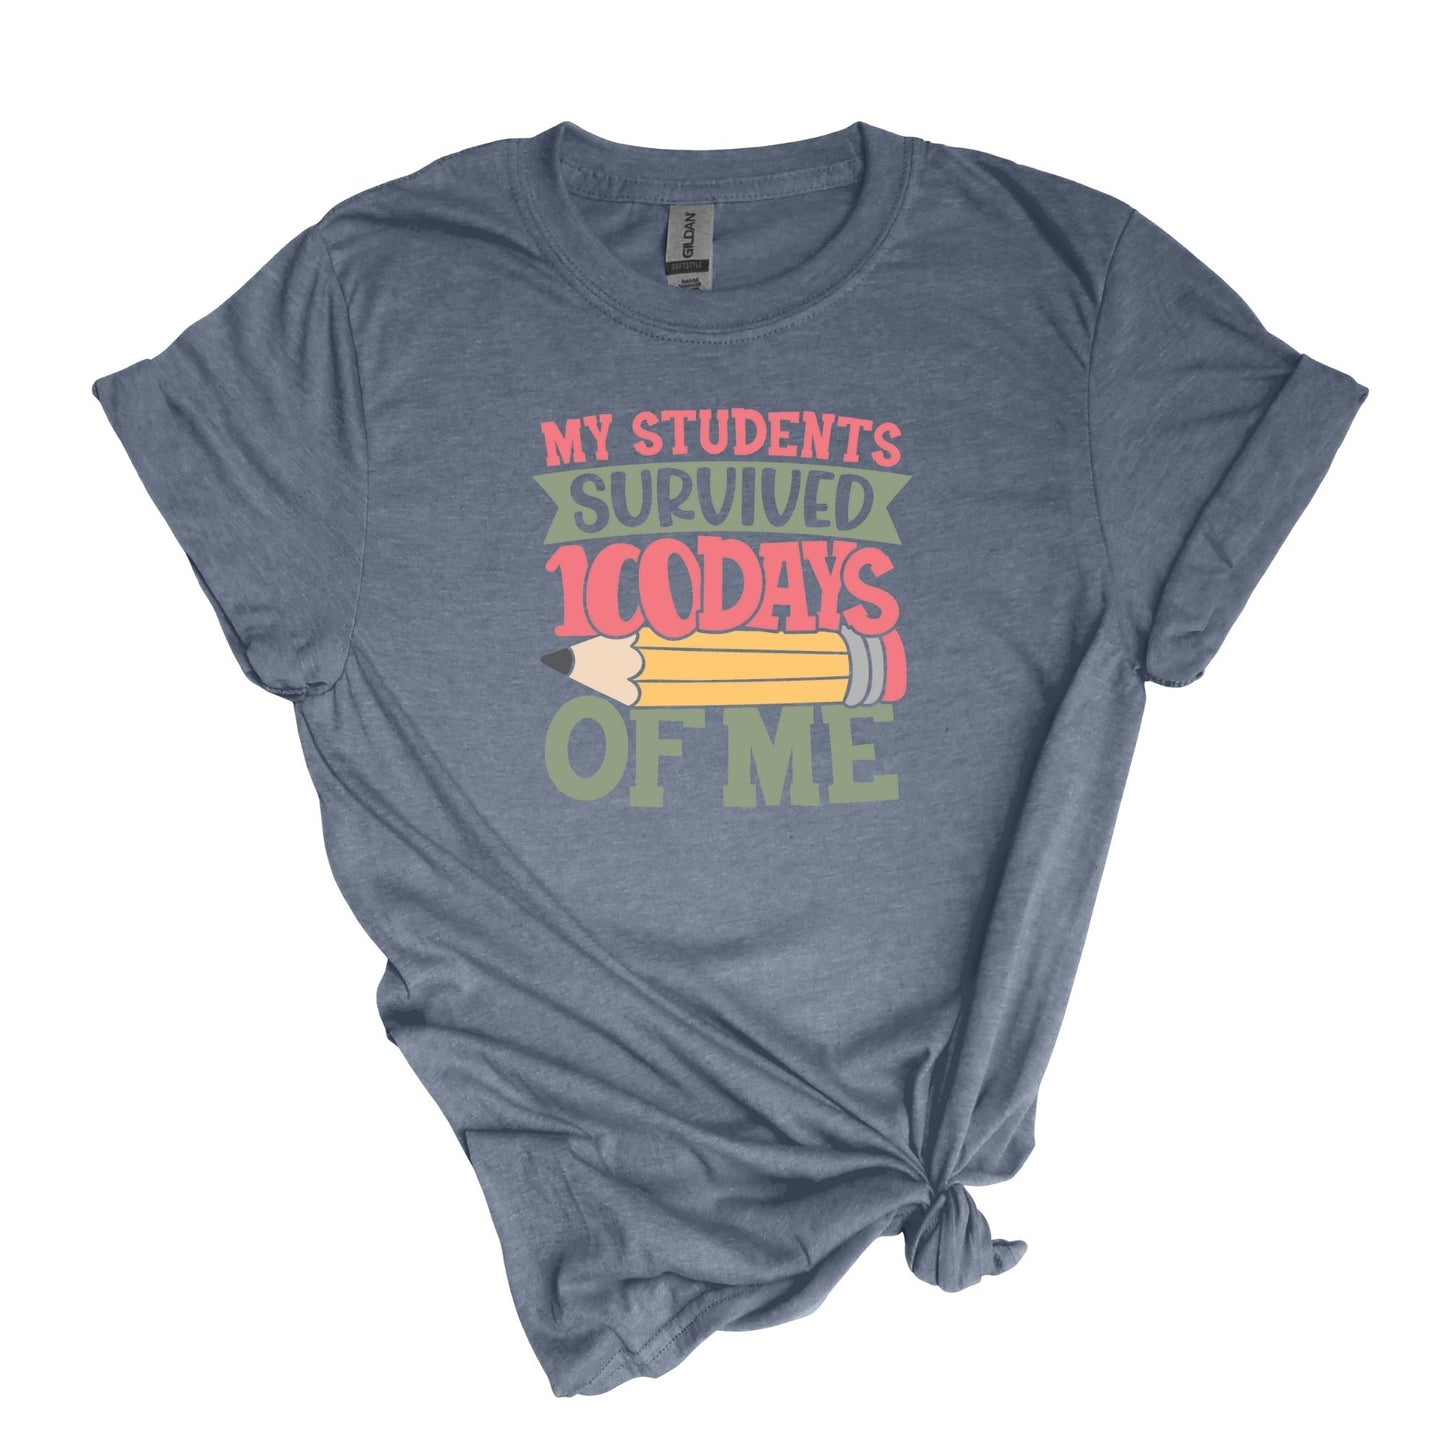 My students survived 100 Days of Me! - Shirt for Teachers - Adult Unisex Soft Style T-shirt